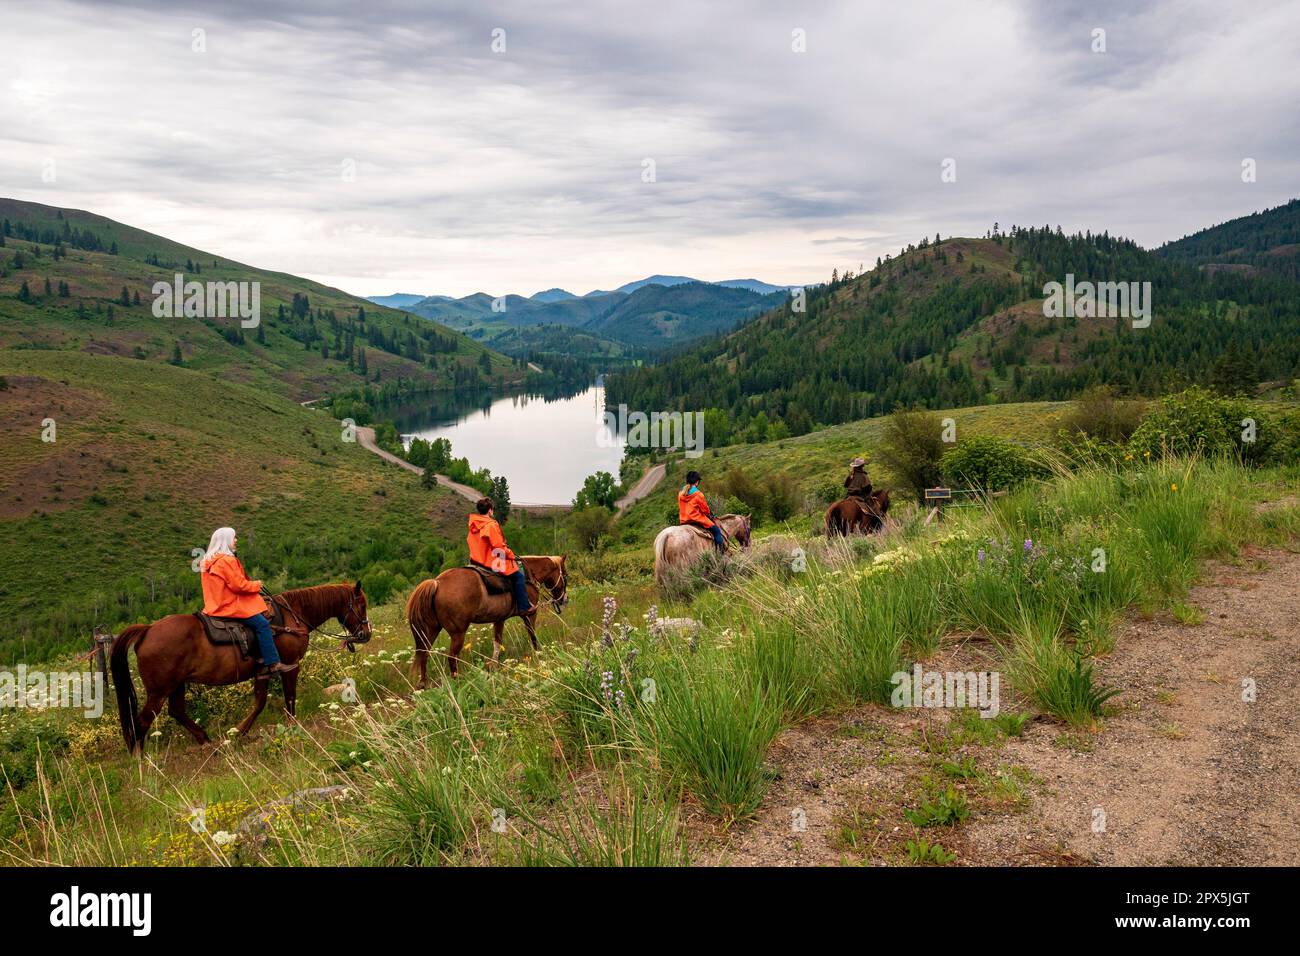 Four horses with riders in orange rain jackets walk a trail on Sun Mountain, with Patterson Lake and Cascade Mountains in the distance. Stock Photo